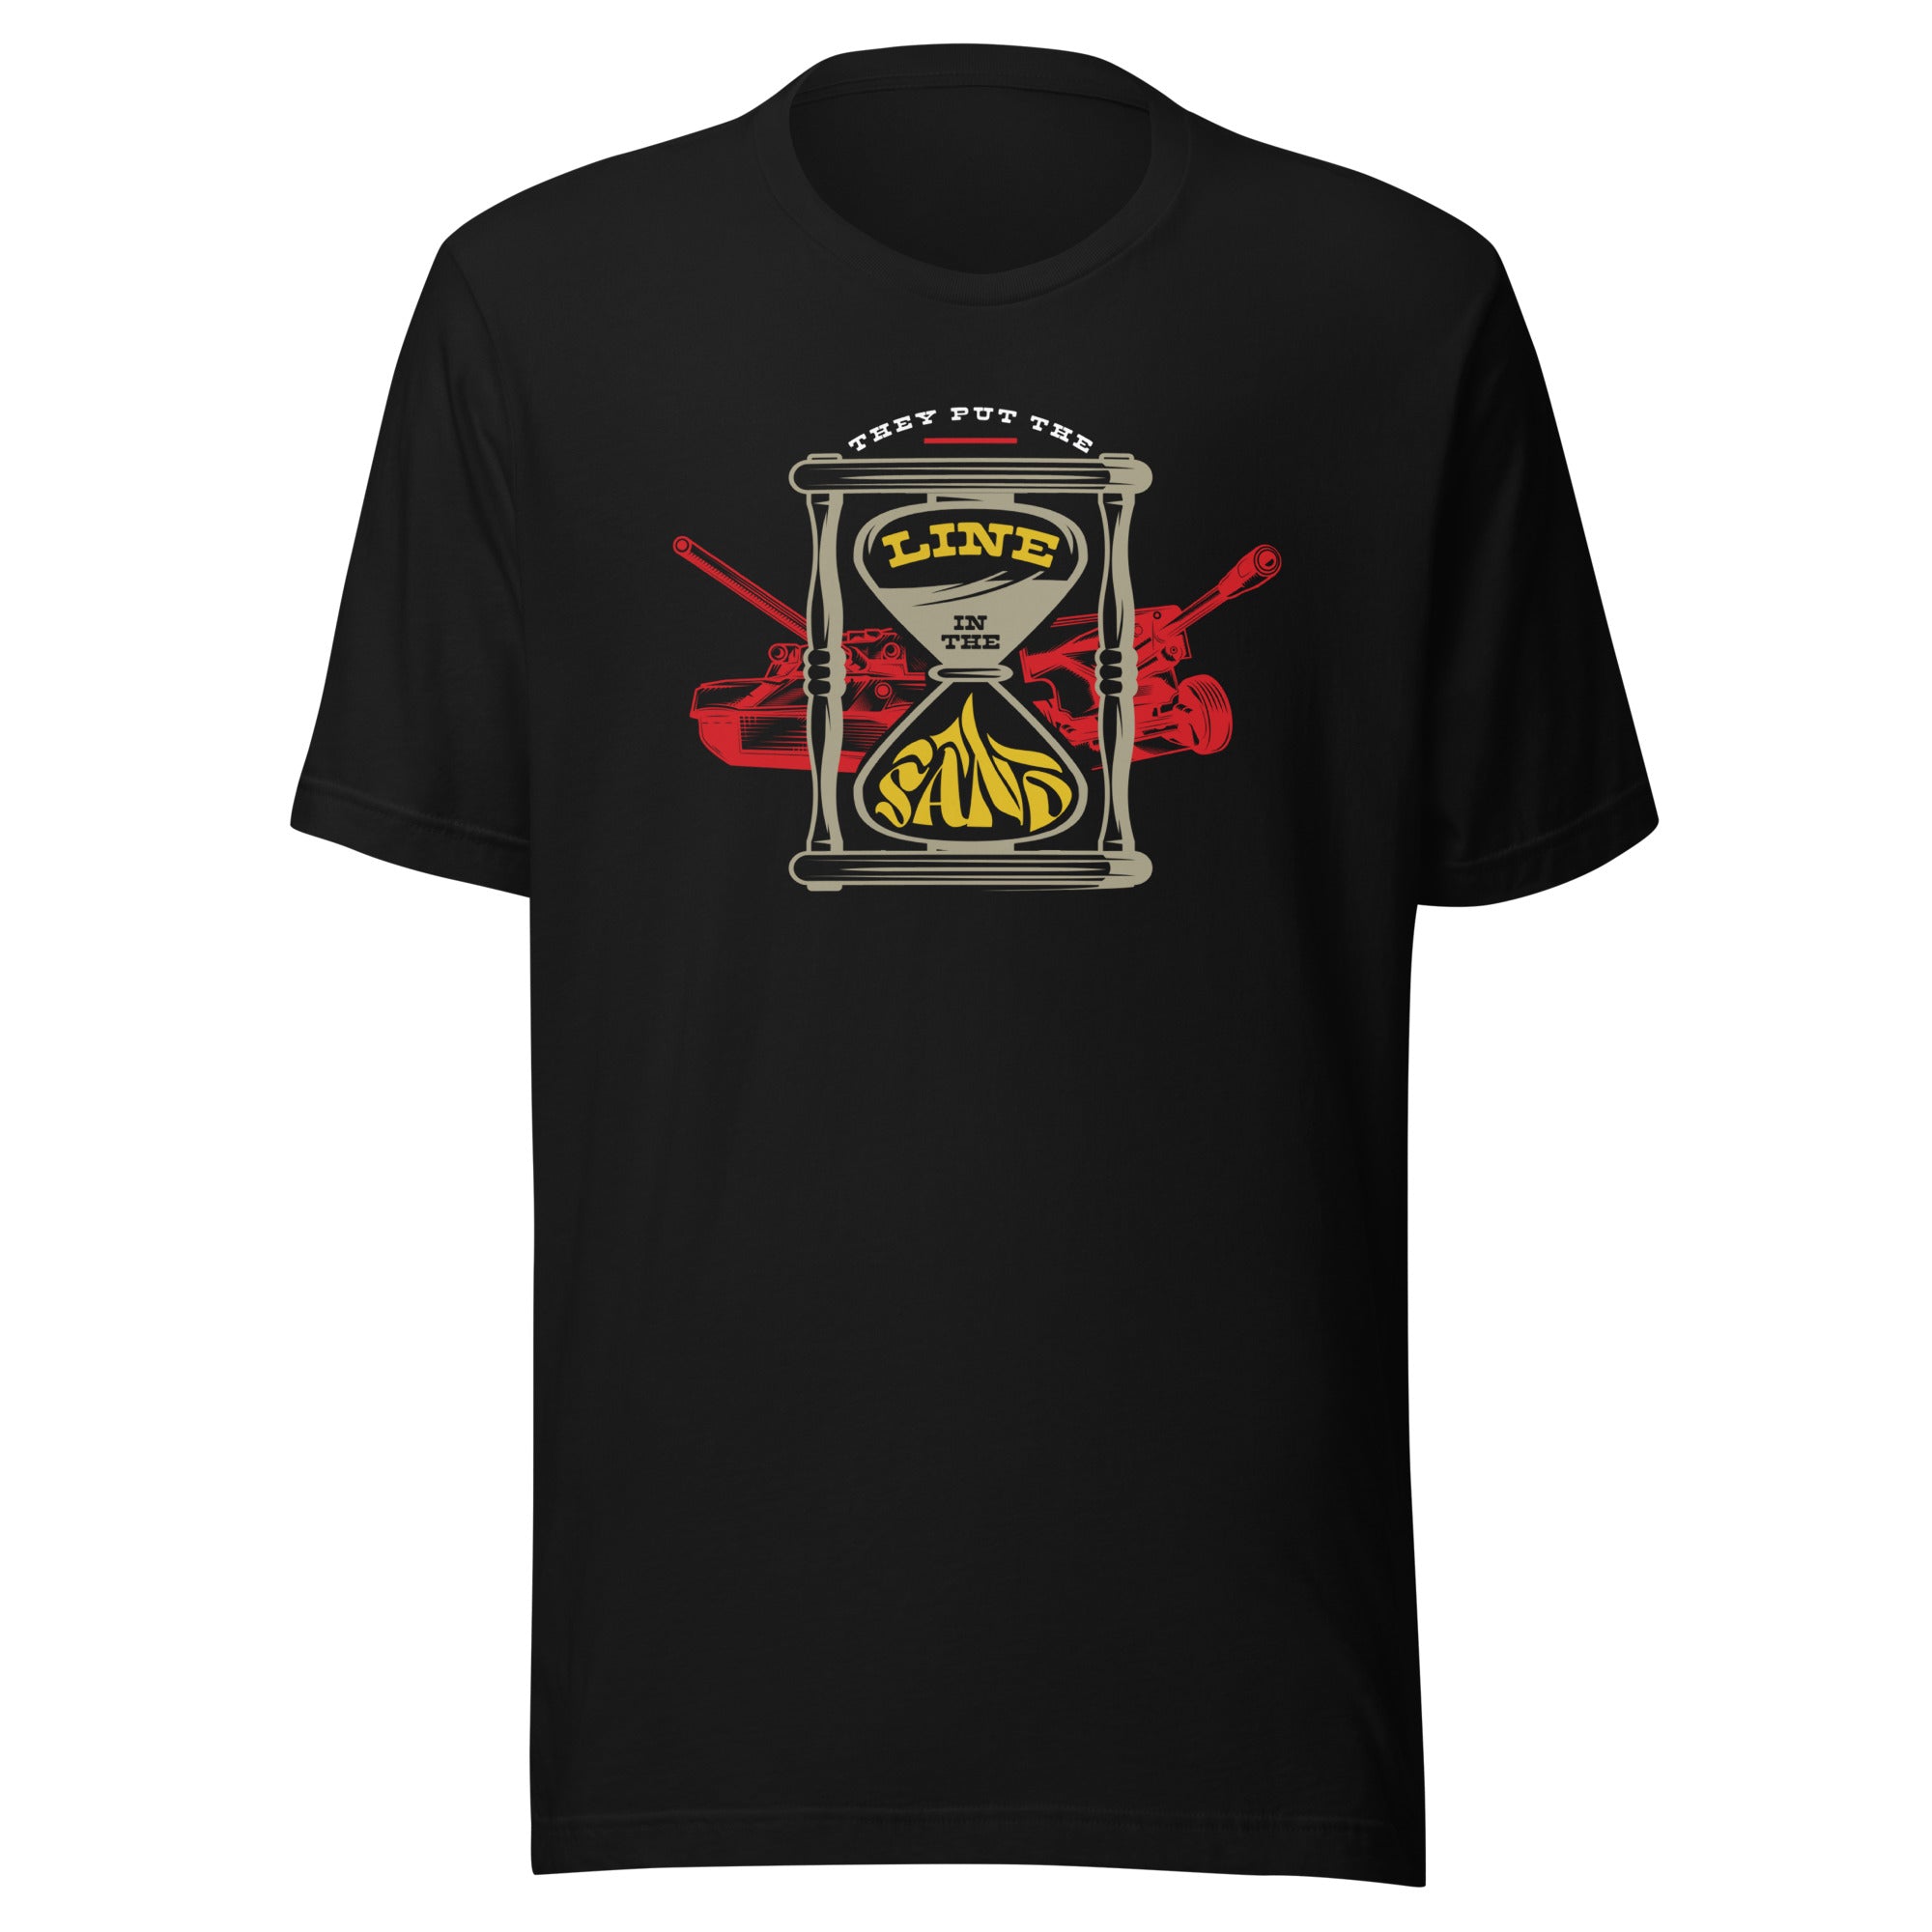 Line In The Sand (Black/Red Tank Variant)